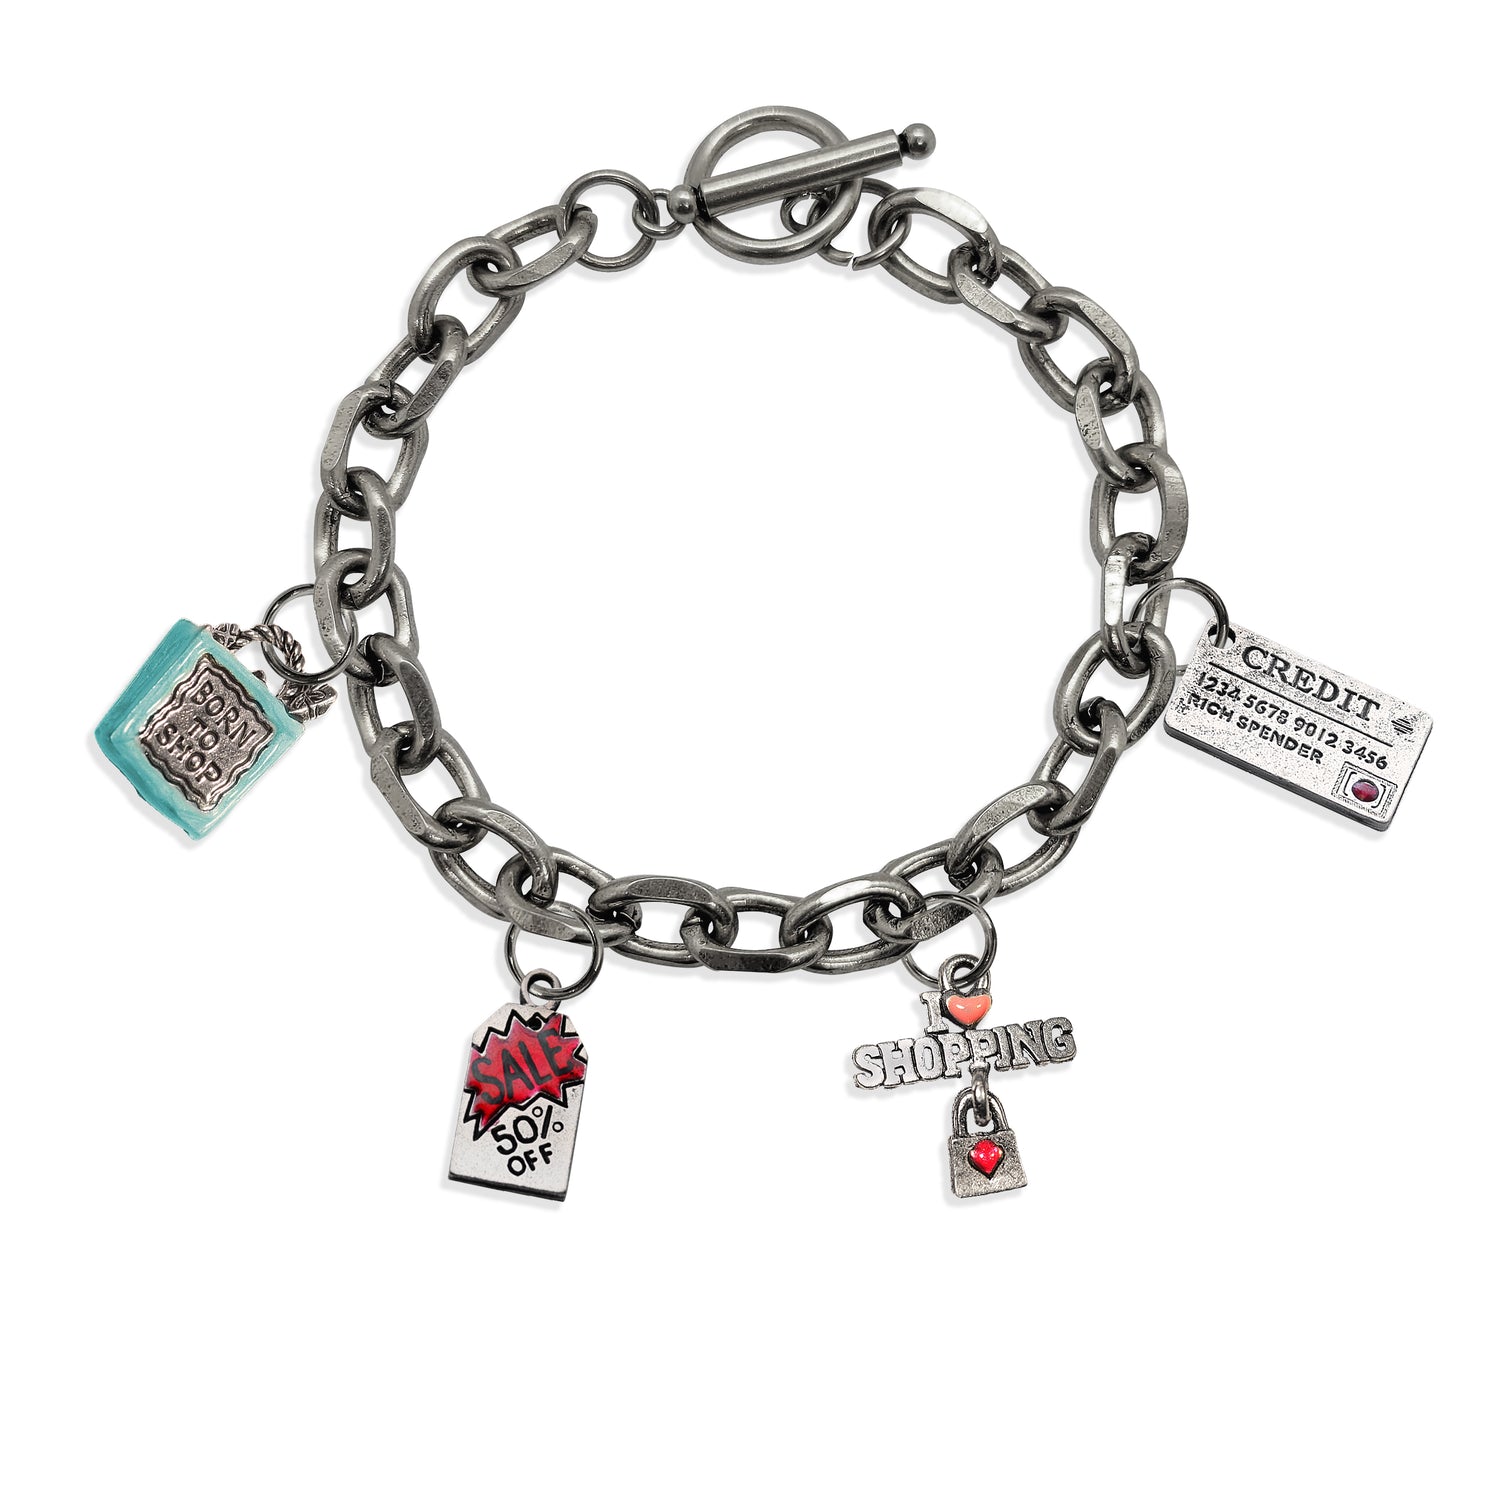 Whimsical Gifts | Born to Shop Toggle Charm Bracelet | 4 Handpainted Charms | Antique Gold or Antique Silver Finish in Antique Silver Finish | Hobbies & Special Interests | Fashionista Jewelry